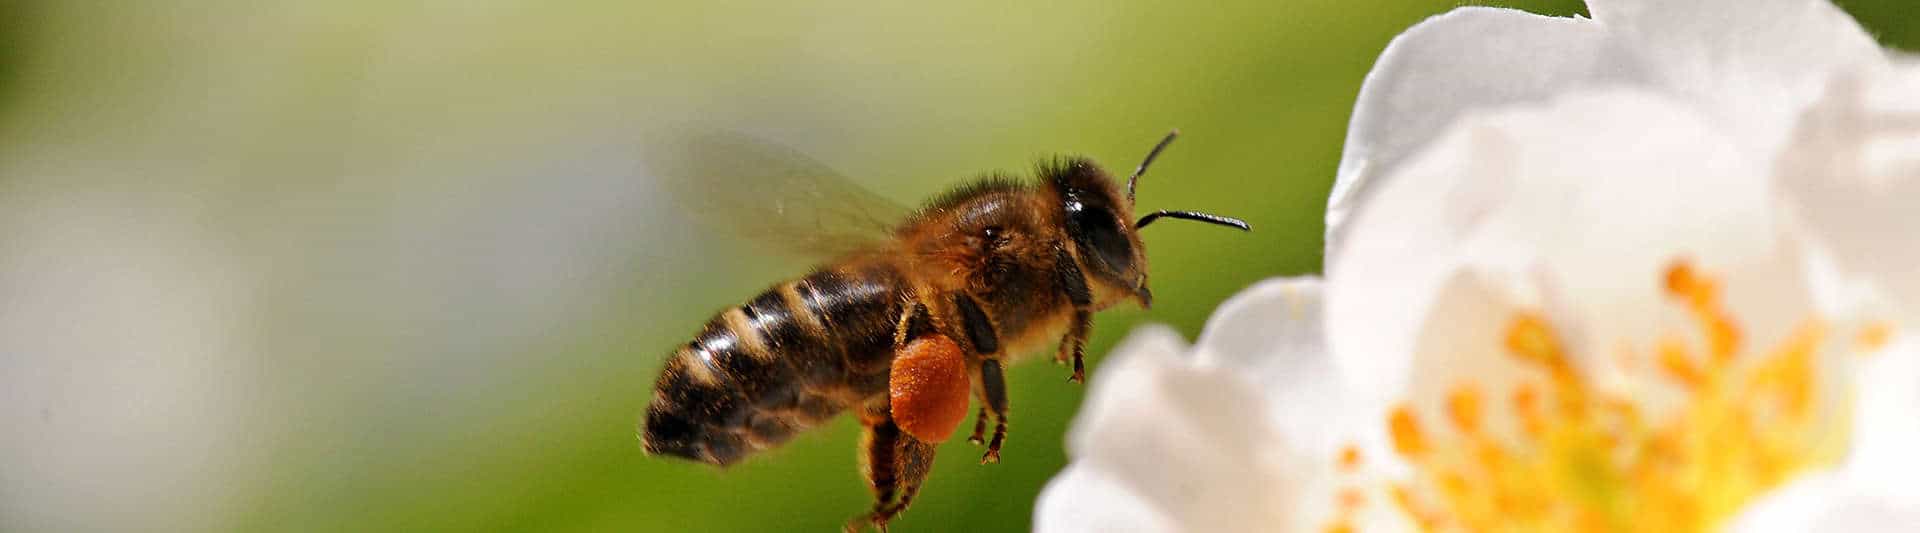 Tips For Safely Making And Using Natural Bee Killer Spray